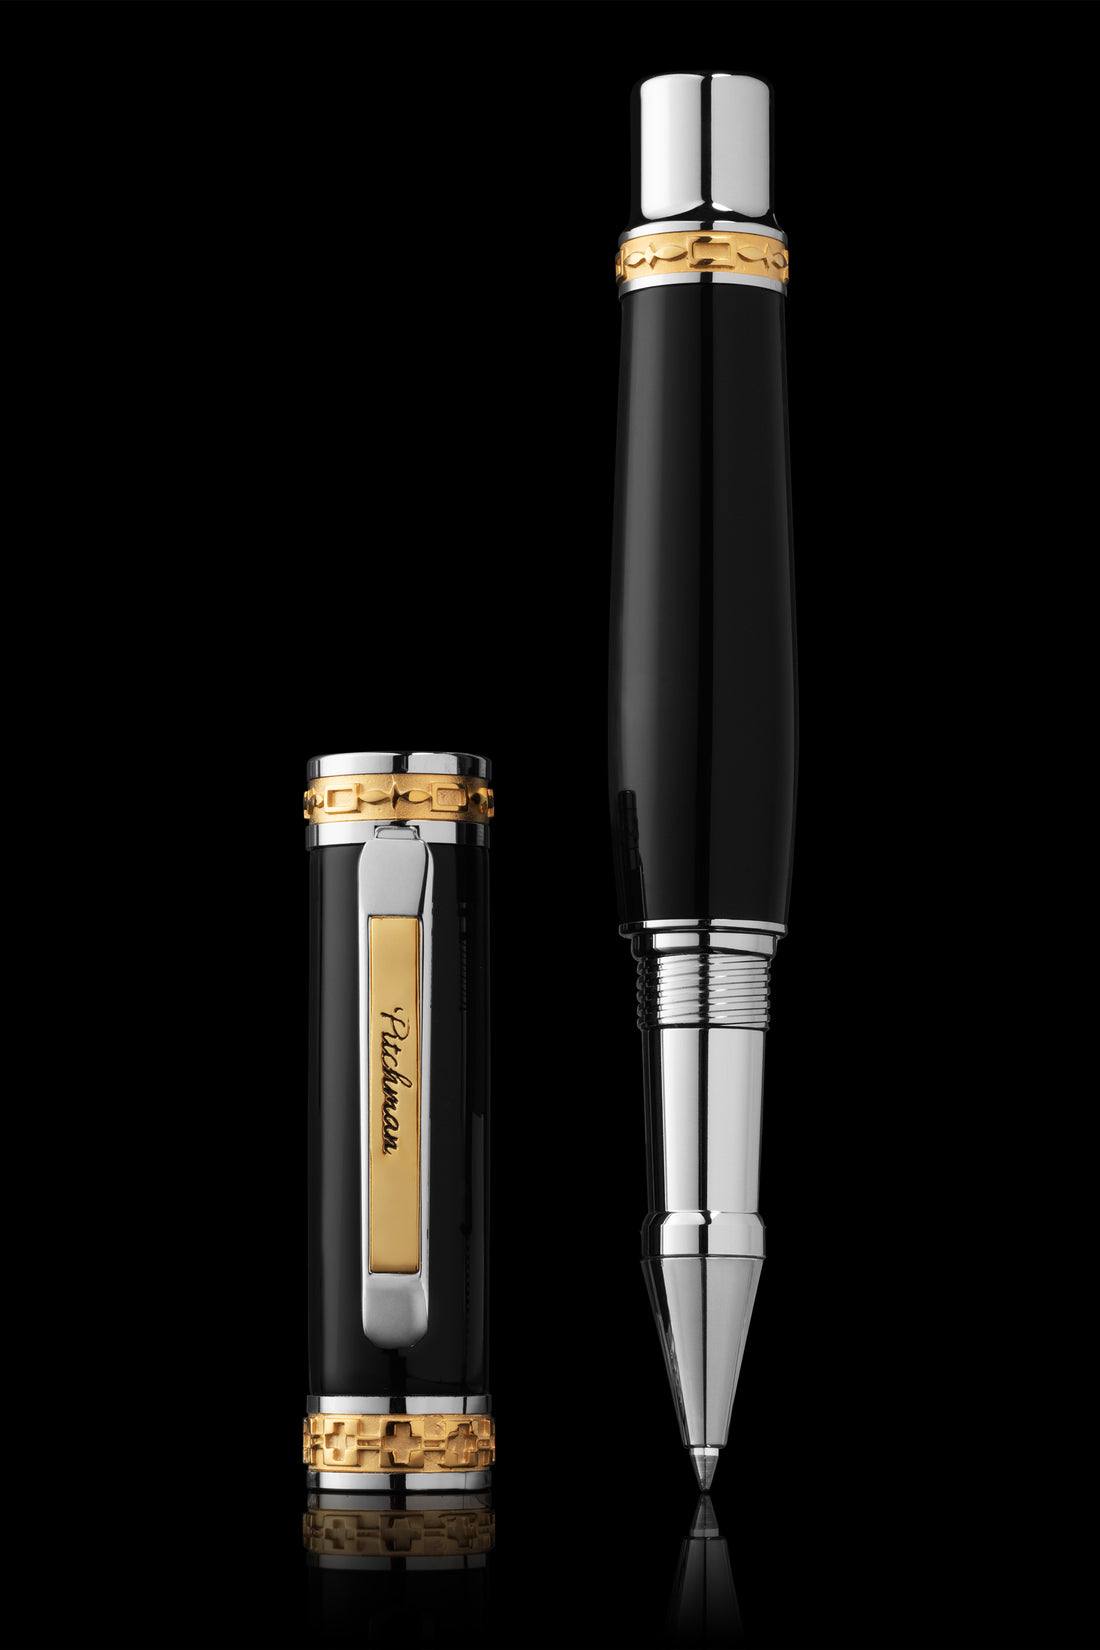 Pitchman Closer Rollerball Pen - Luxurious black rollerball pen handcrafted with palladium and 22 Kt gold – a unique and fancy executive pen.